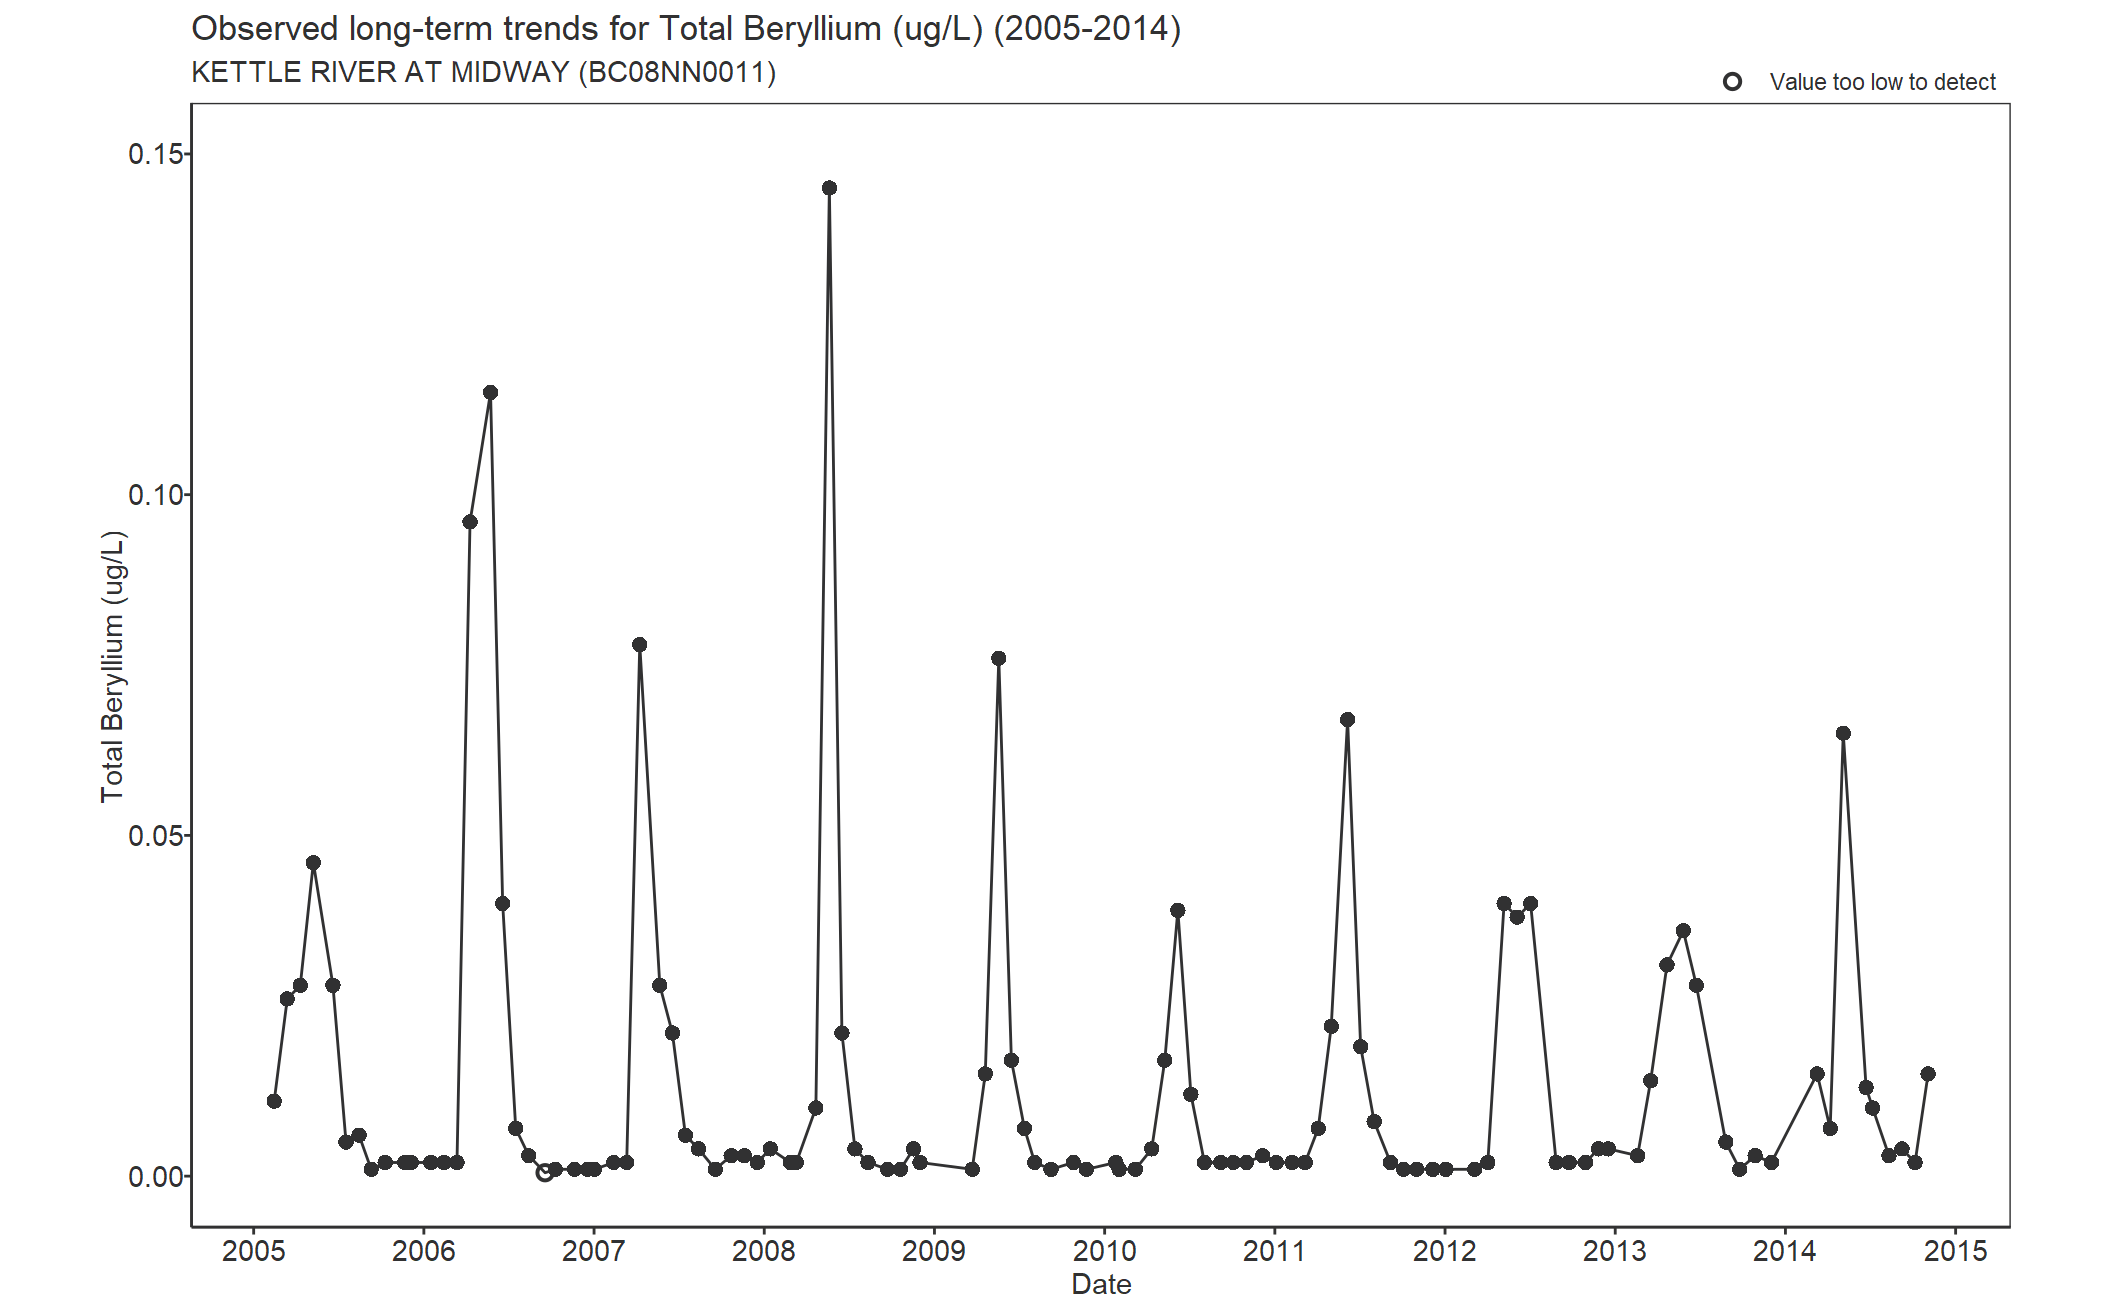 Observed long-term trends for Beryllium Total (2005-2014)